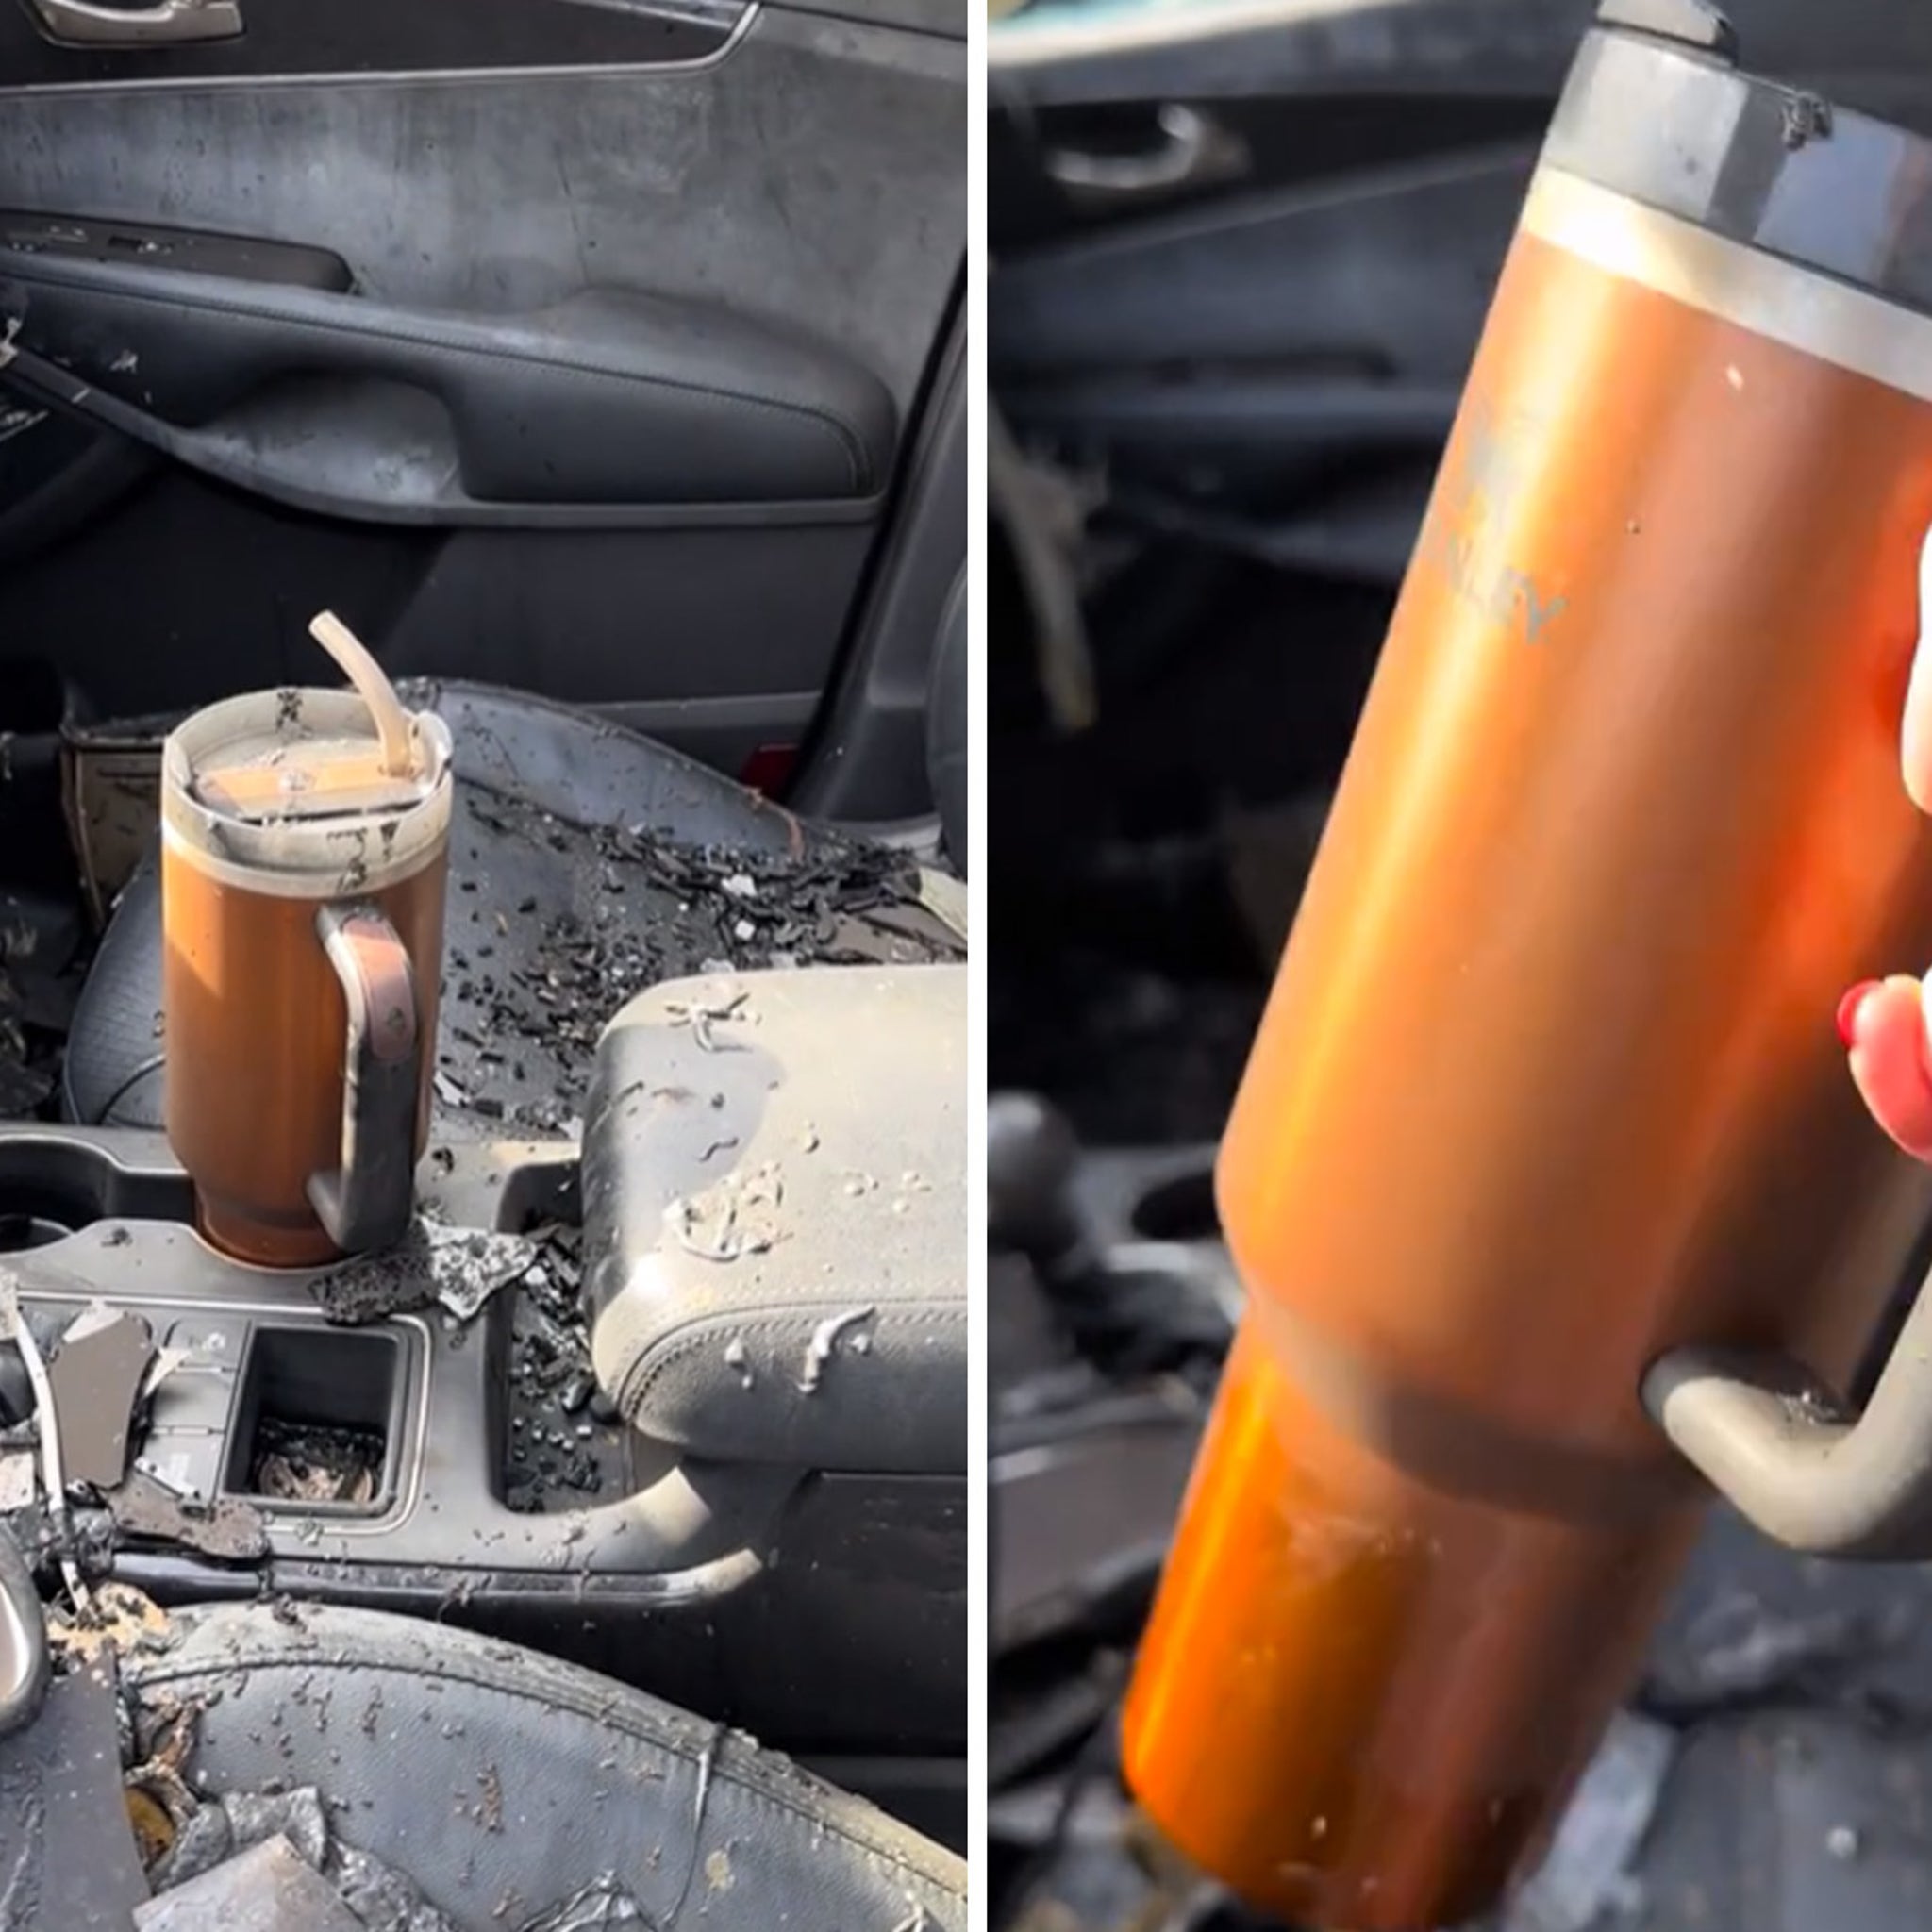 Woman's Stanley tumbler survived a car fire - Now the company is giving her  free cups and a new ride - ABC7 Los Angeles